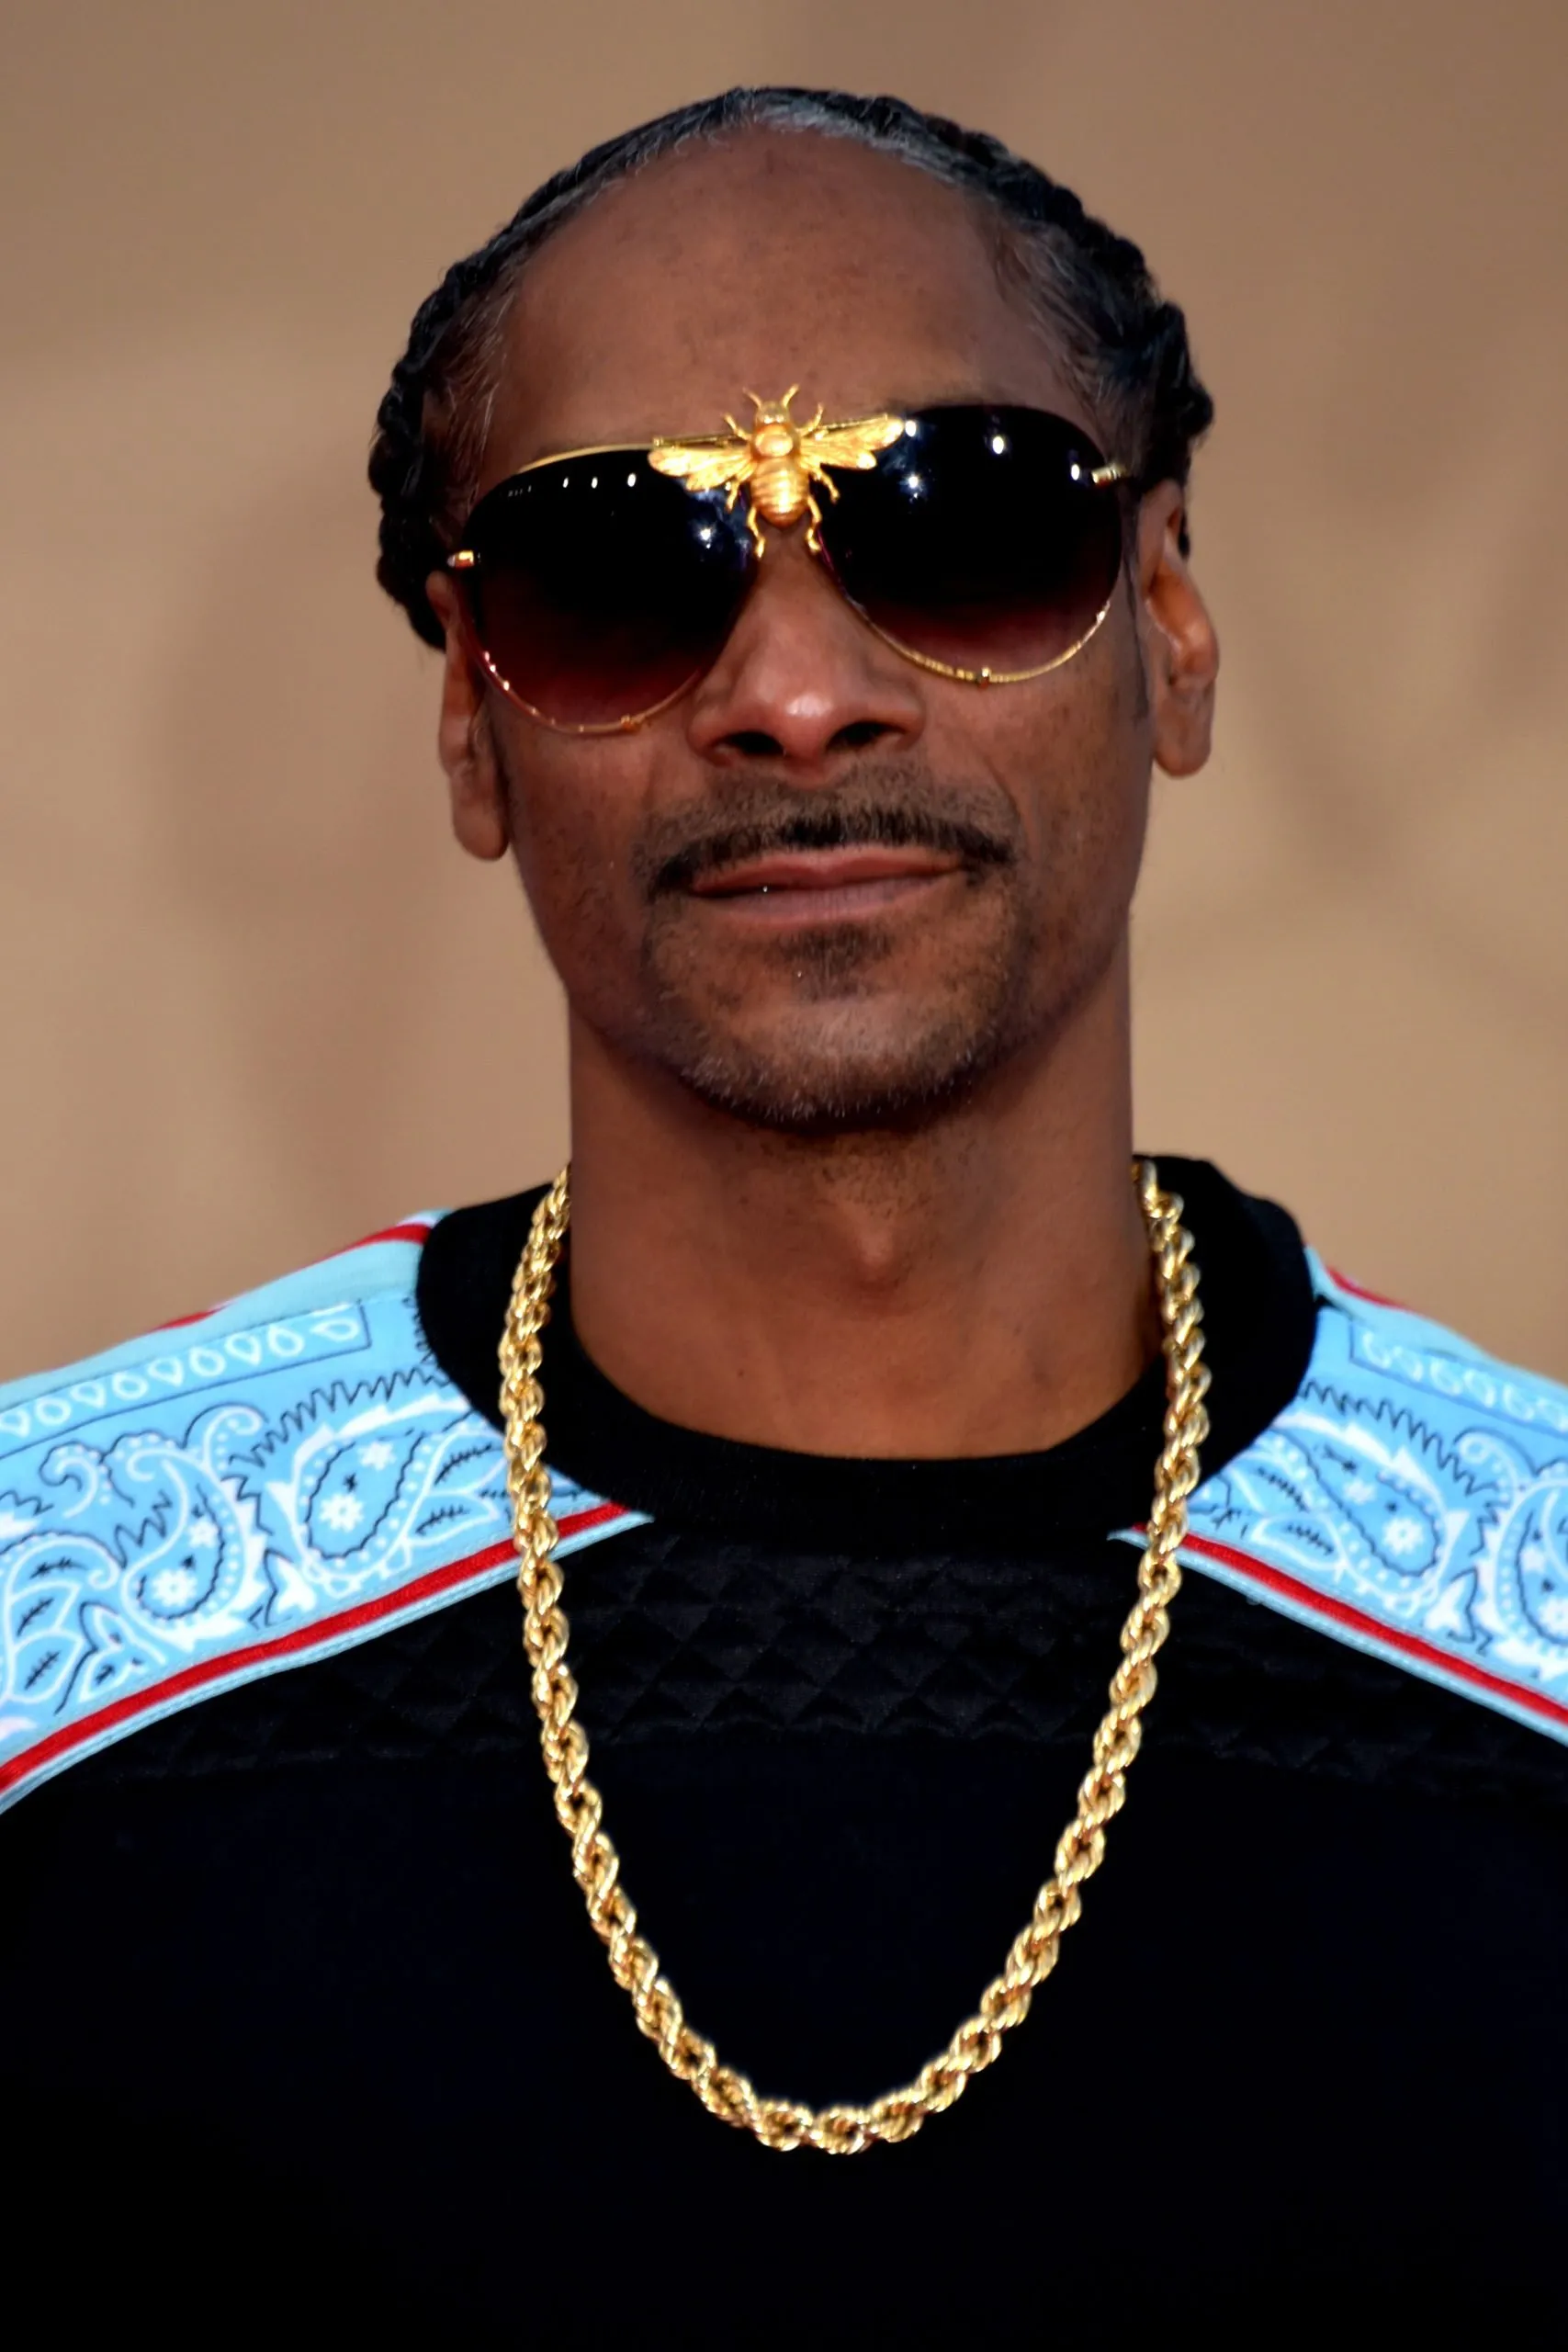 What is Snoop Dogg’s Zodiac sign? AstrologySpark